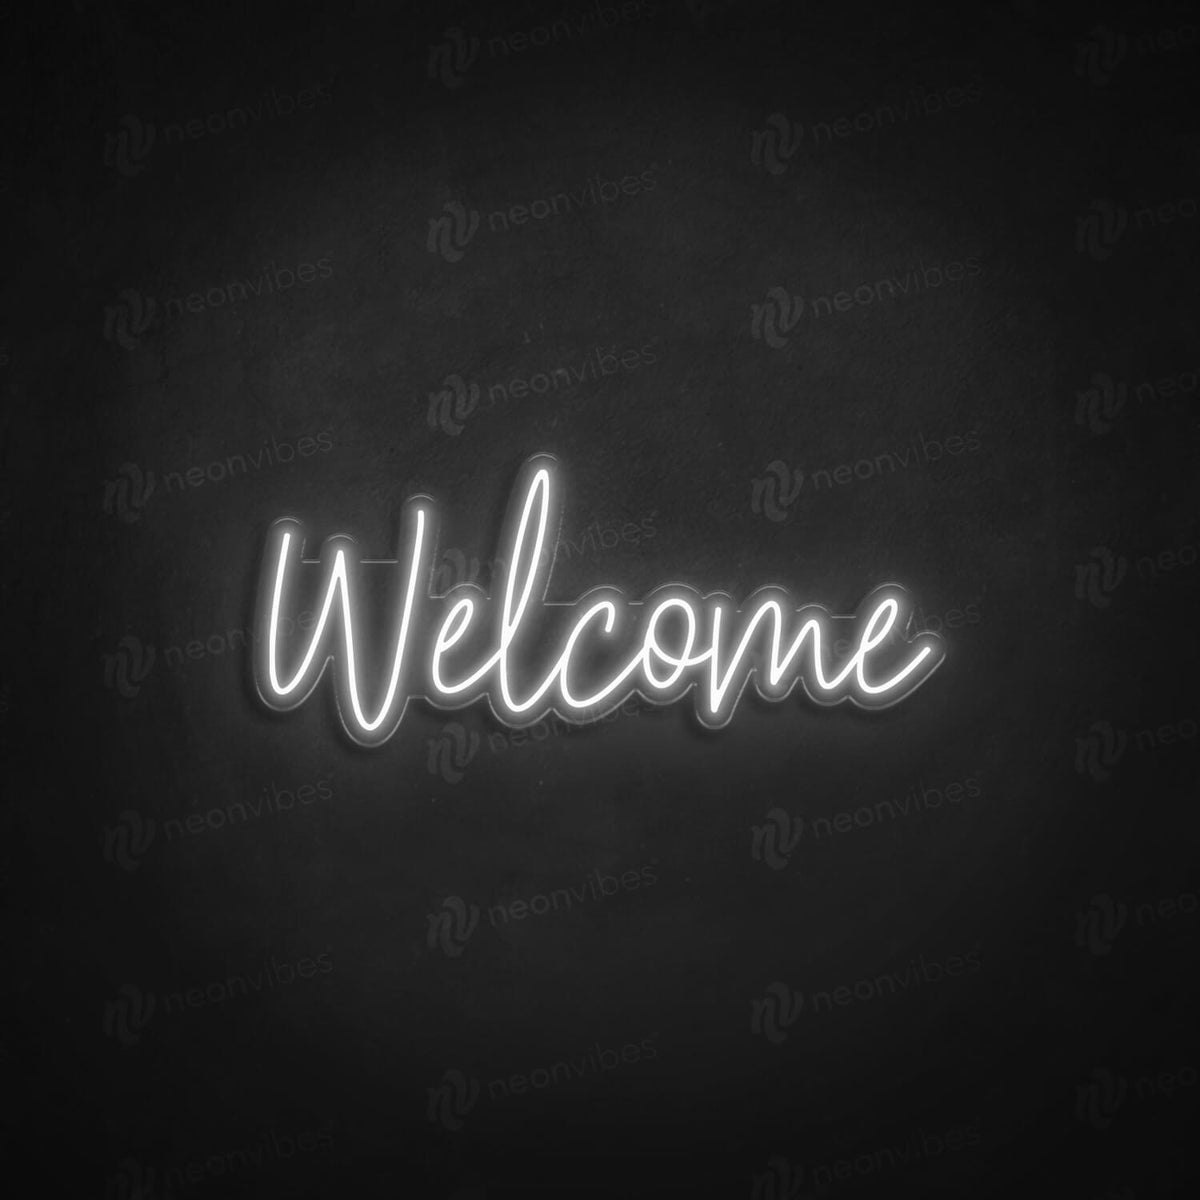 Welcome neon sign